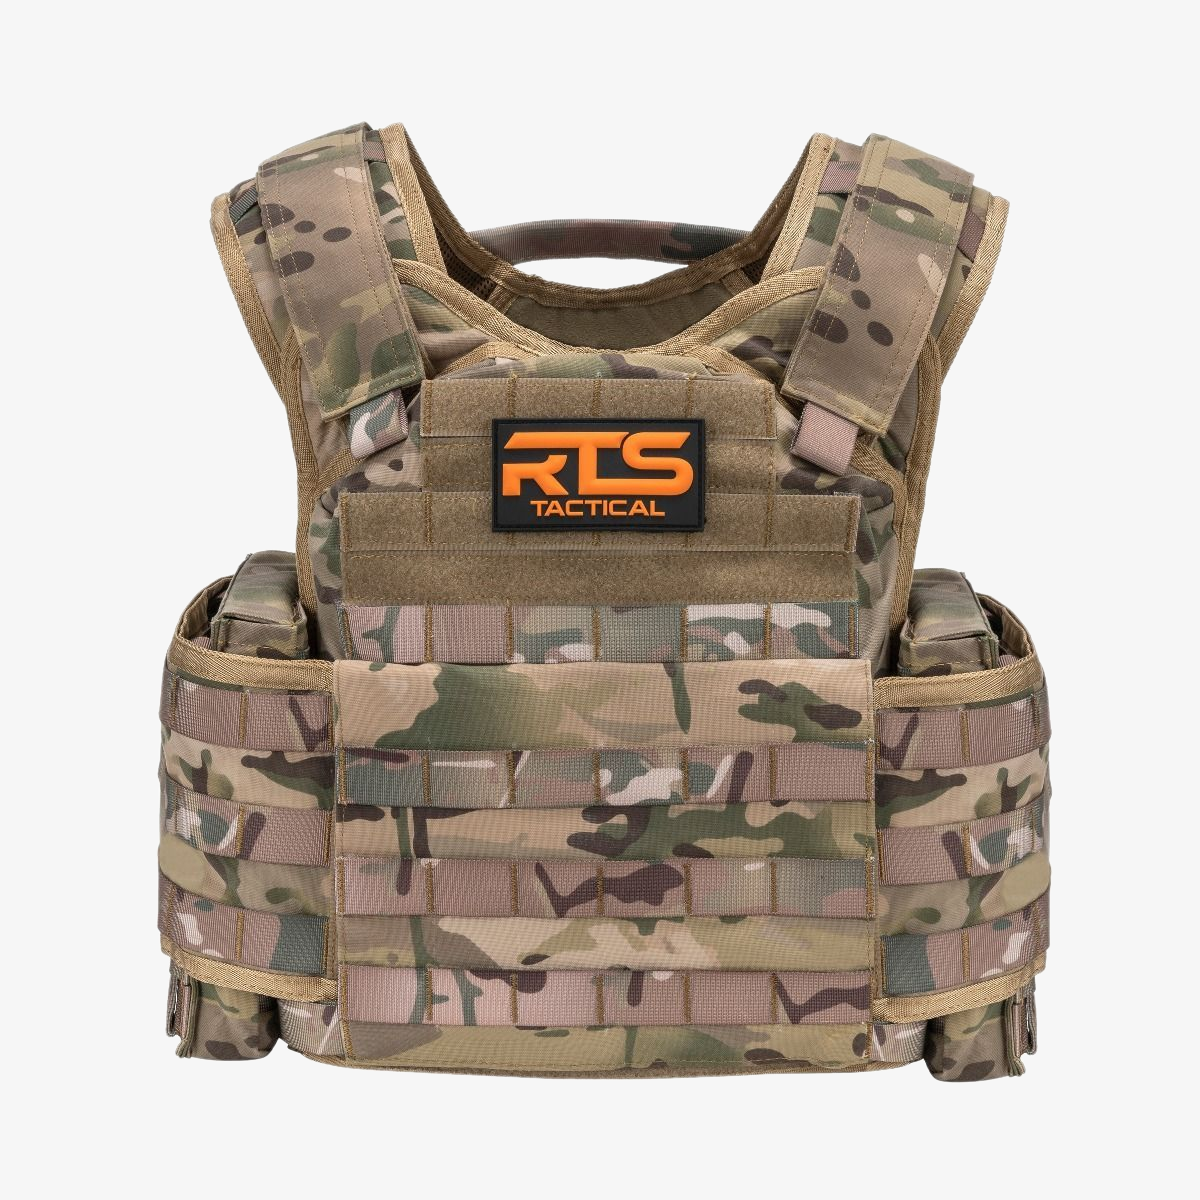 RTS Body Armor Level III+ Special Threat Steel Active Shooter Kit